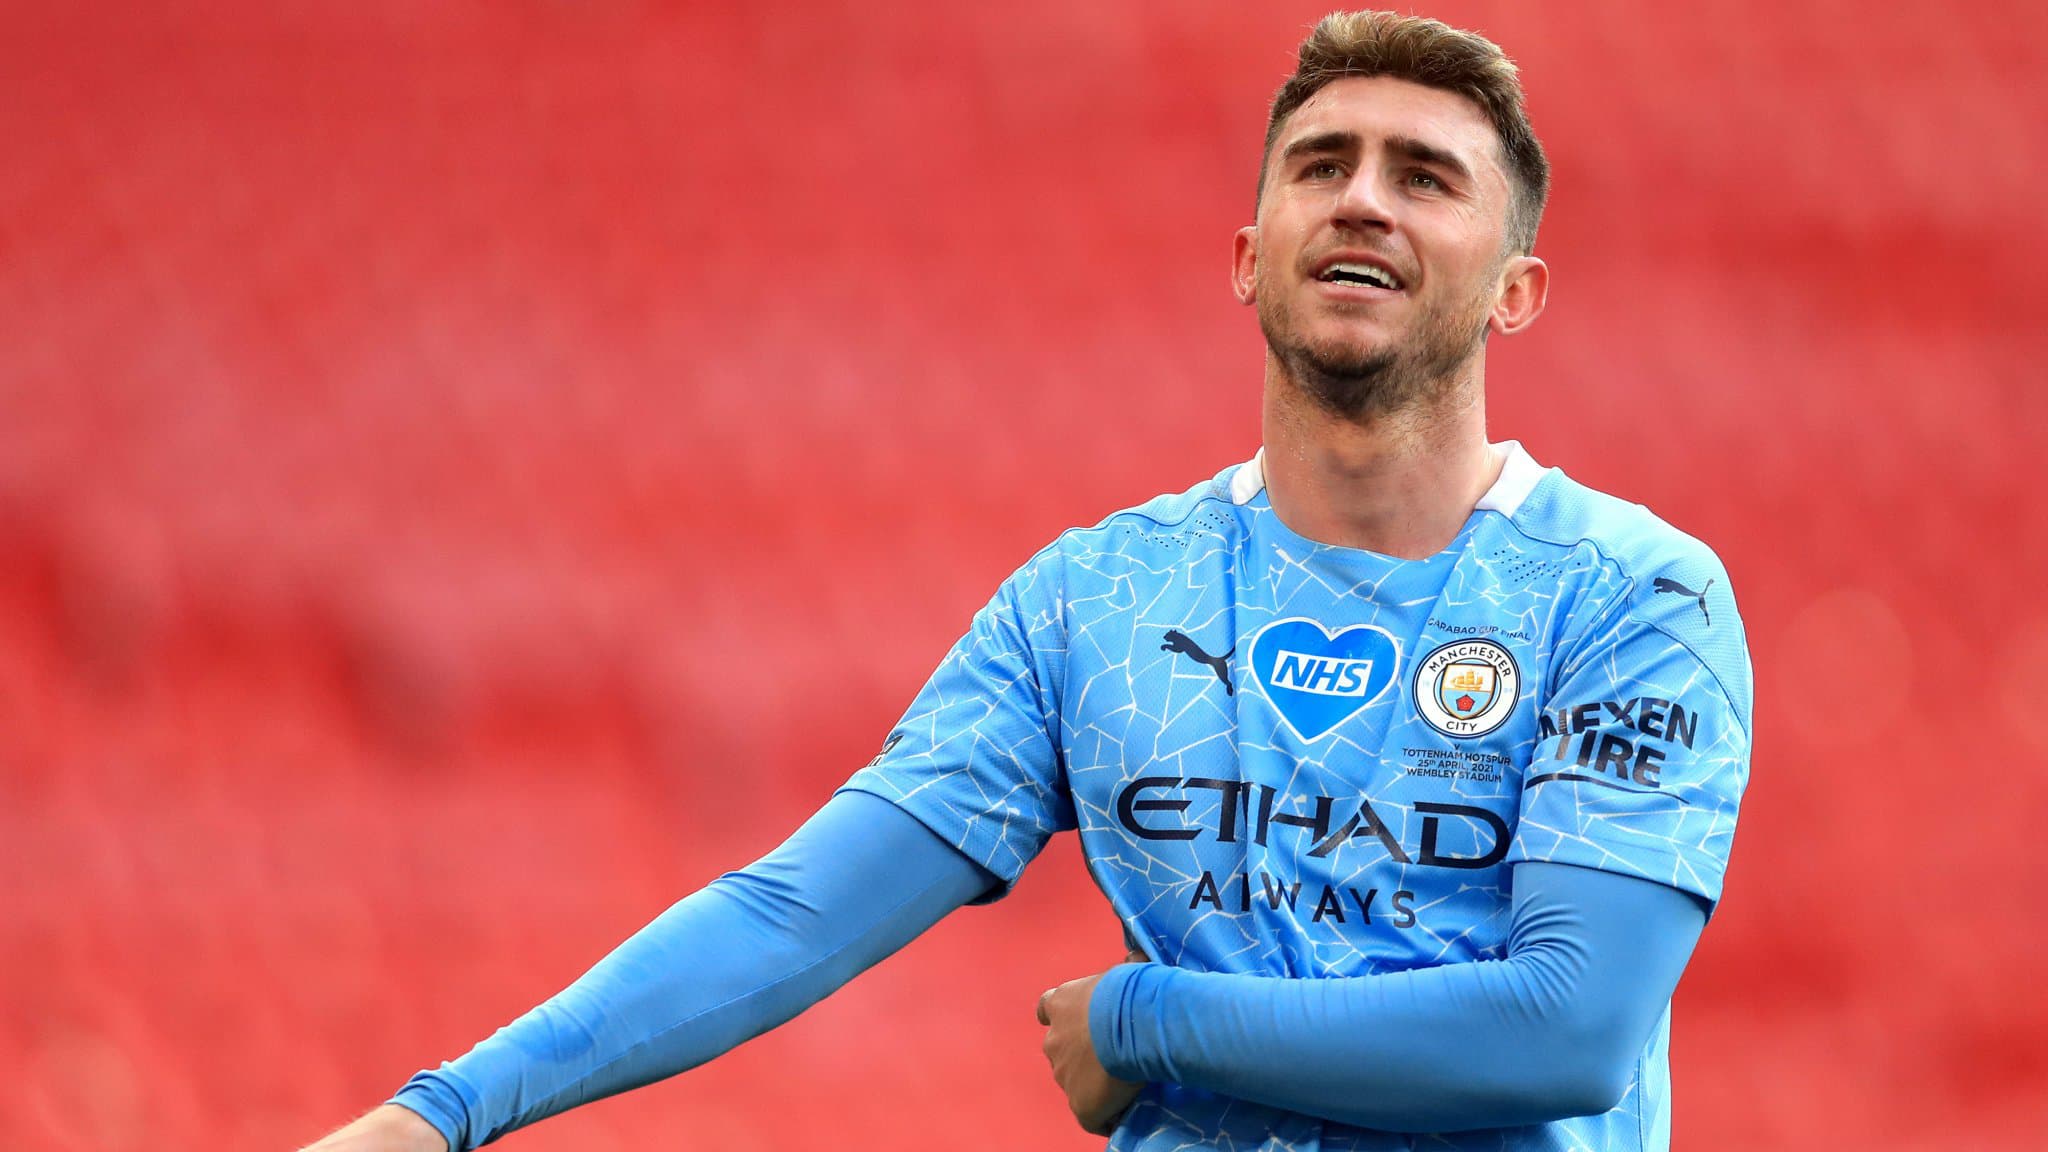 Euro: Laporte will play for Spain, according to Madrid press Indian Paper